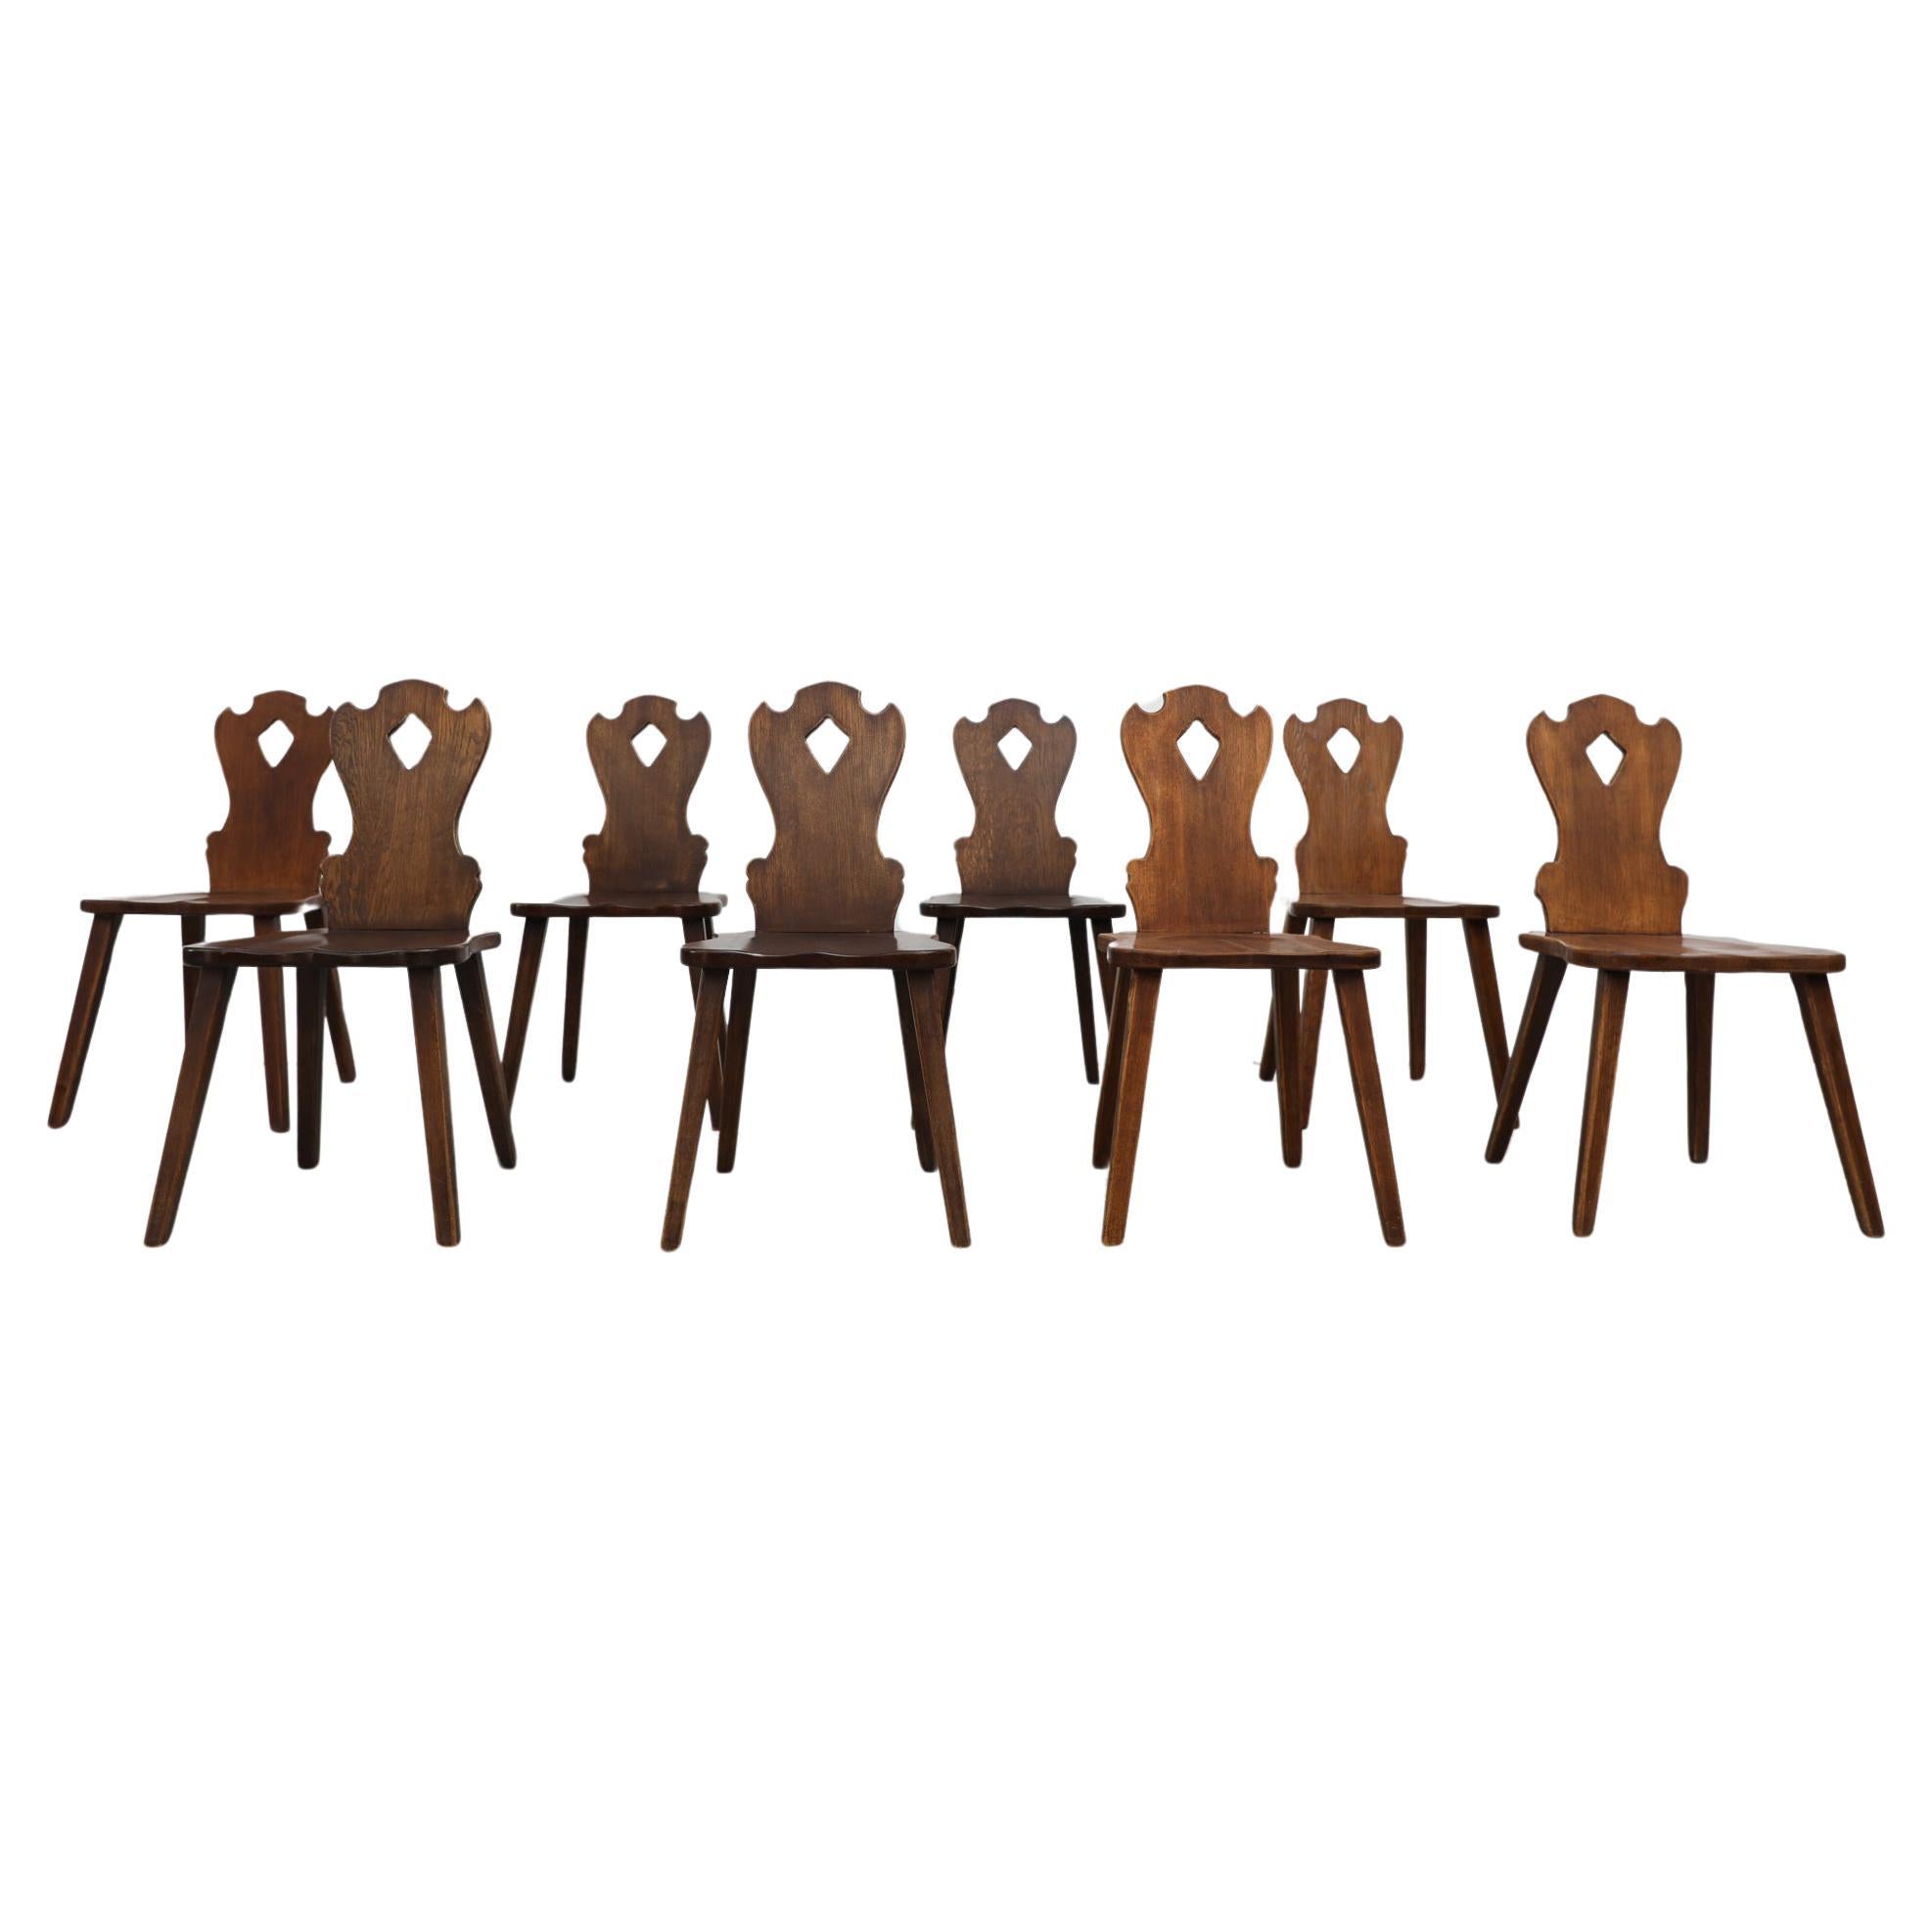 Set of 8 Brutalist Organic Carved Wooden Chairs For Sale